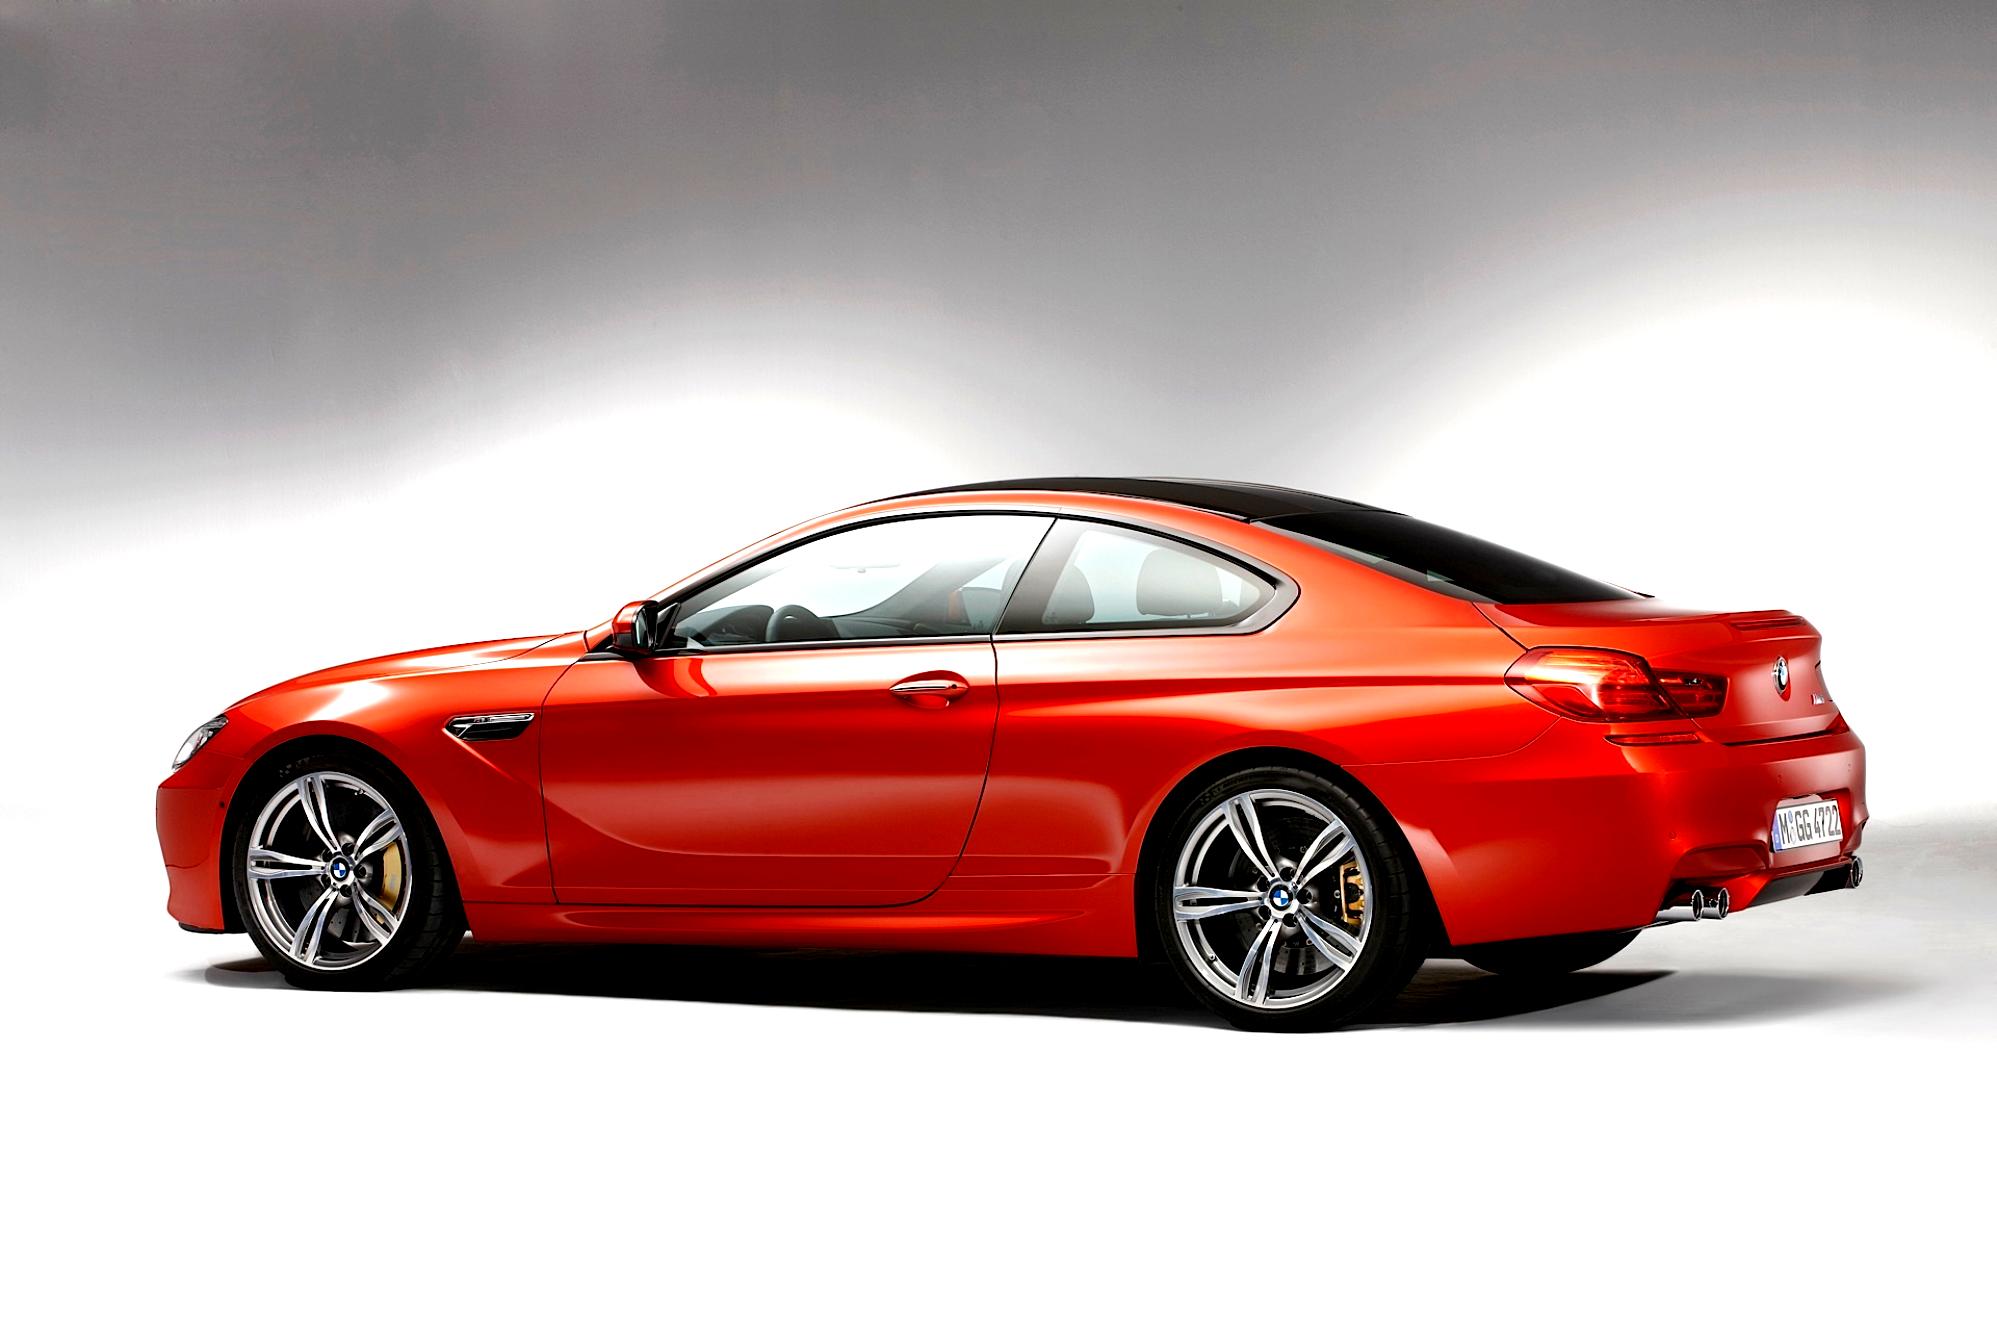 BMW M6 Coupe F13 2012 #22